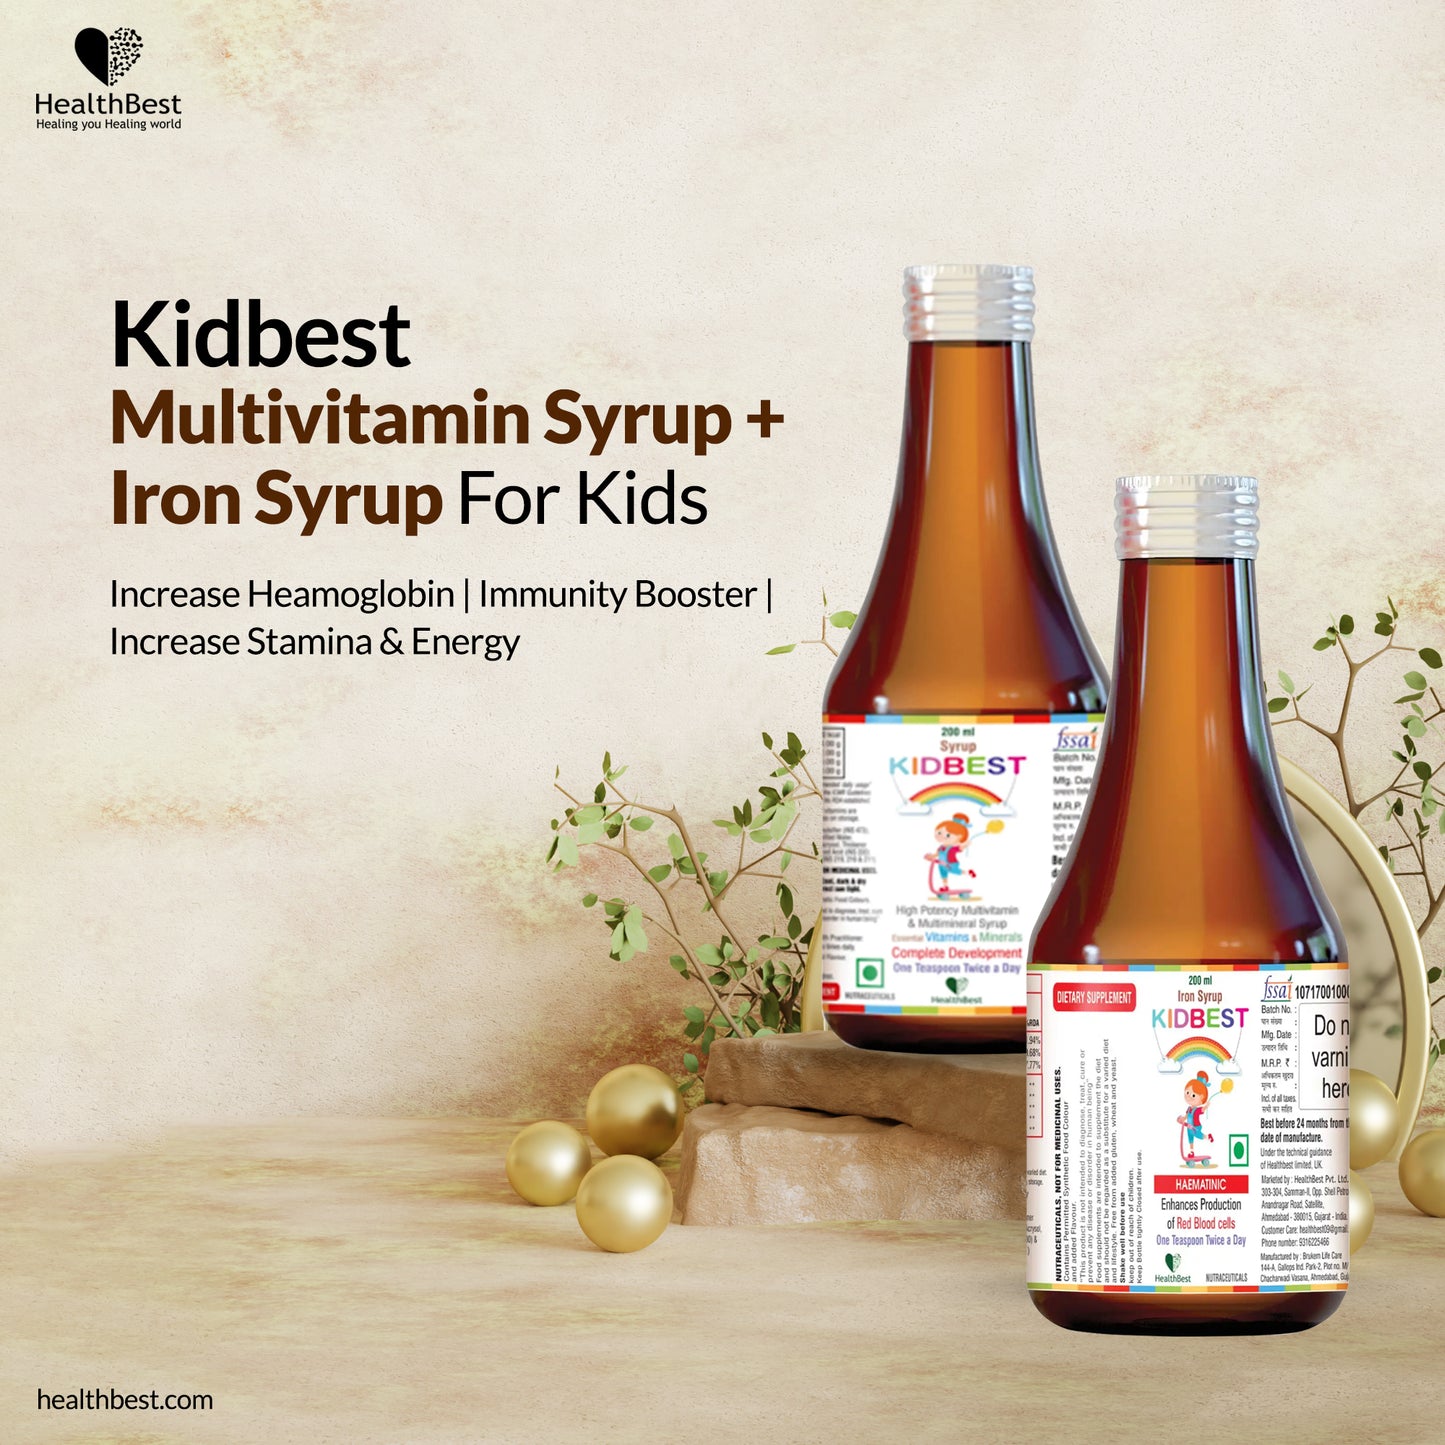 Kidbest Multivitamin Syrup and Iron Syrup for Kids